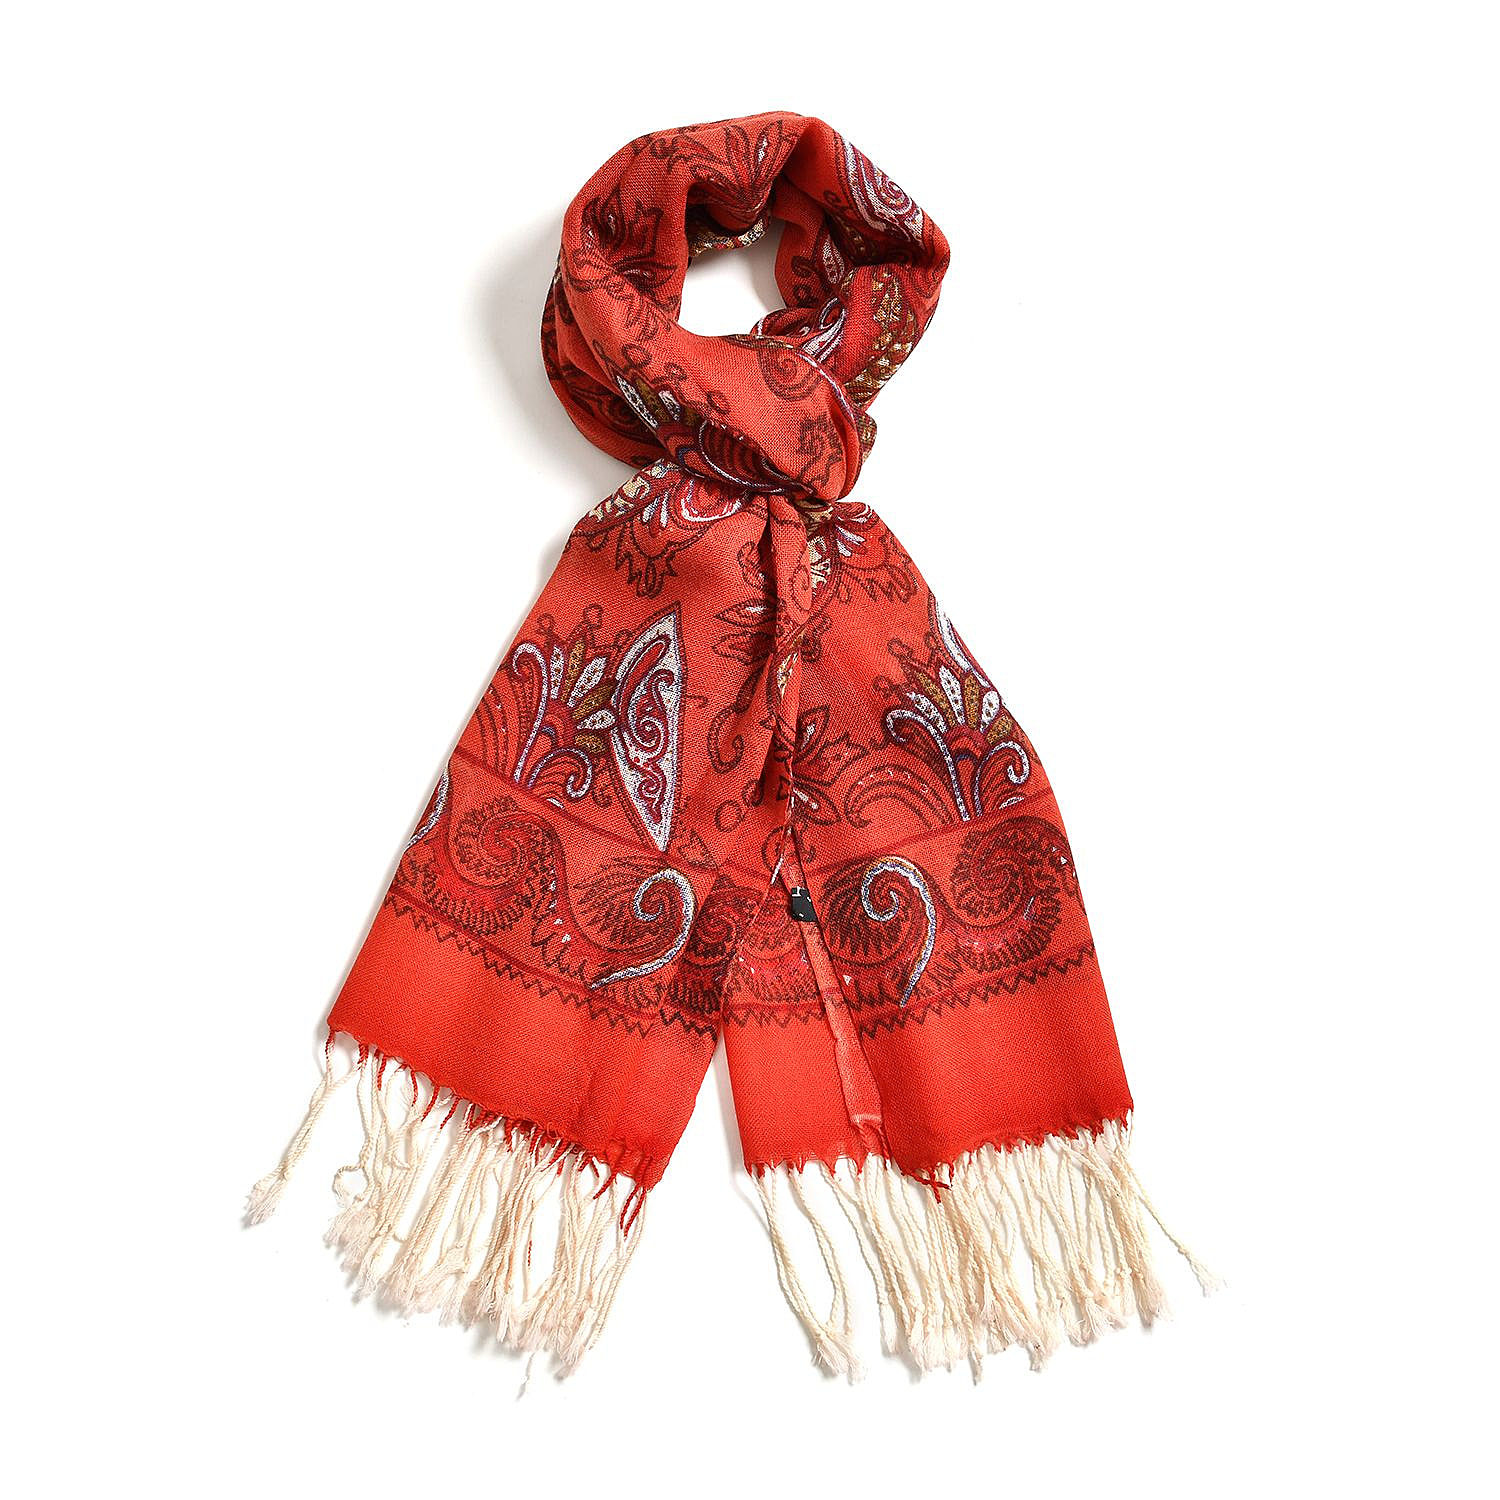 La Marey 100% Merino Wool Floral Pattern Scarf - Red and White